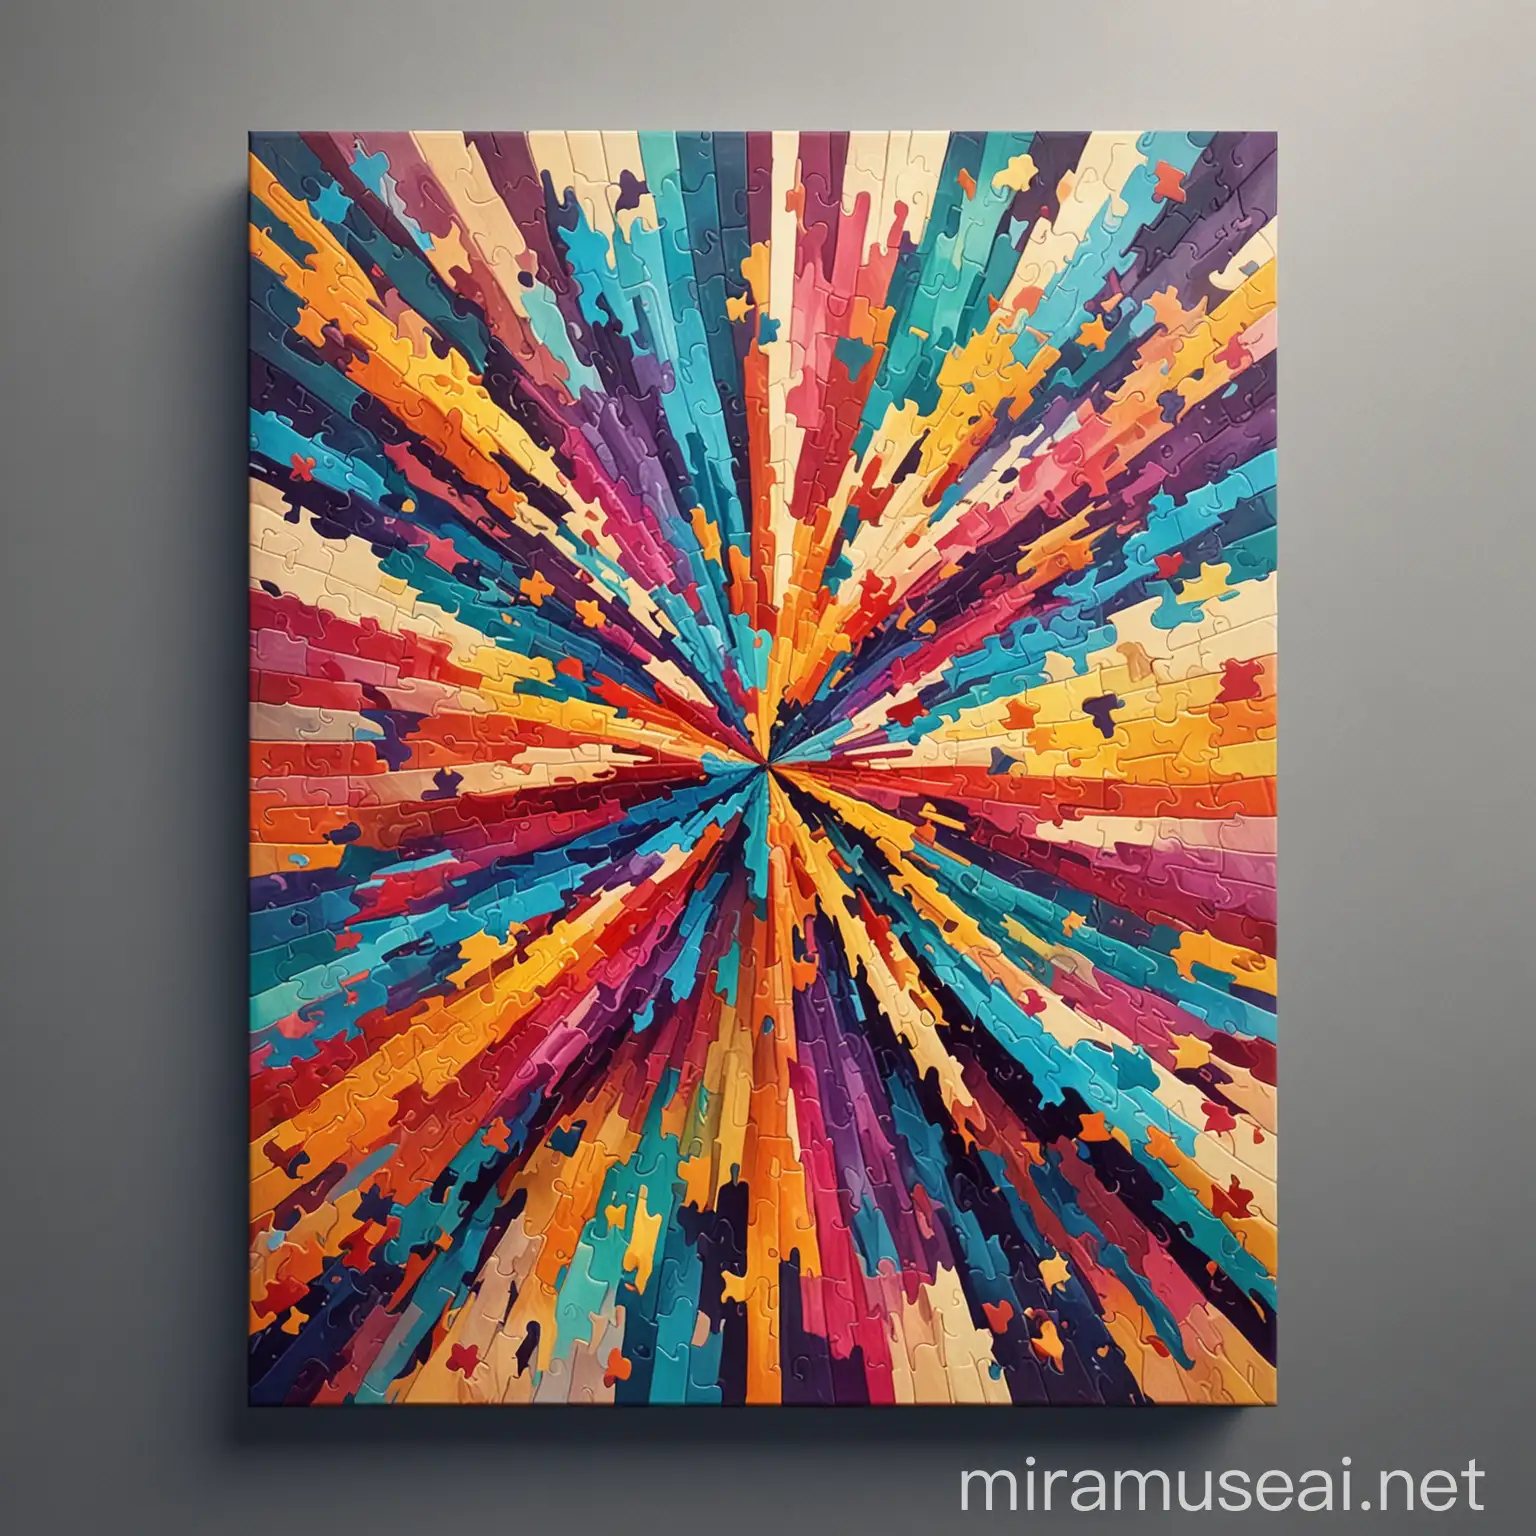 Vibrant Abstract Art Puzzle Poster Colorful Contemporary Expressionism